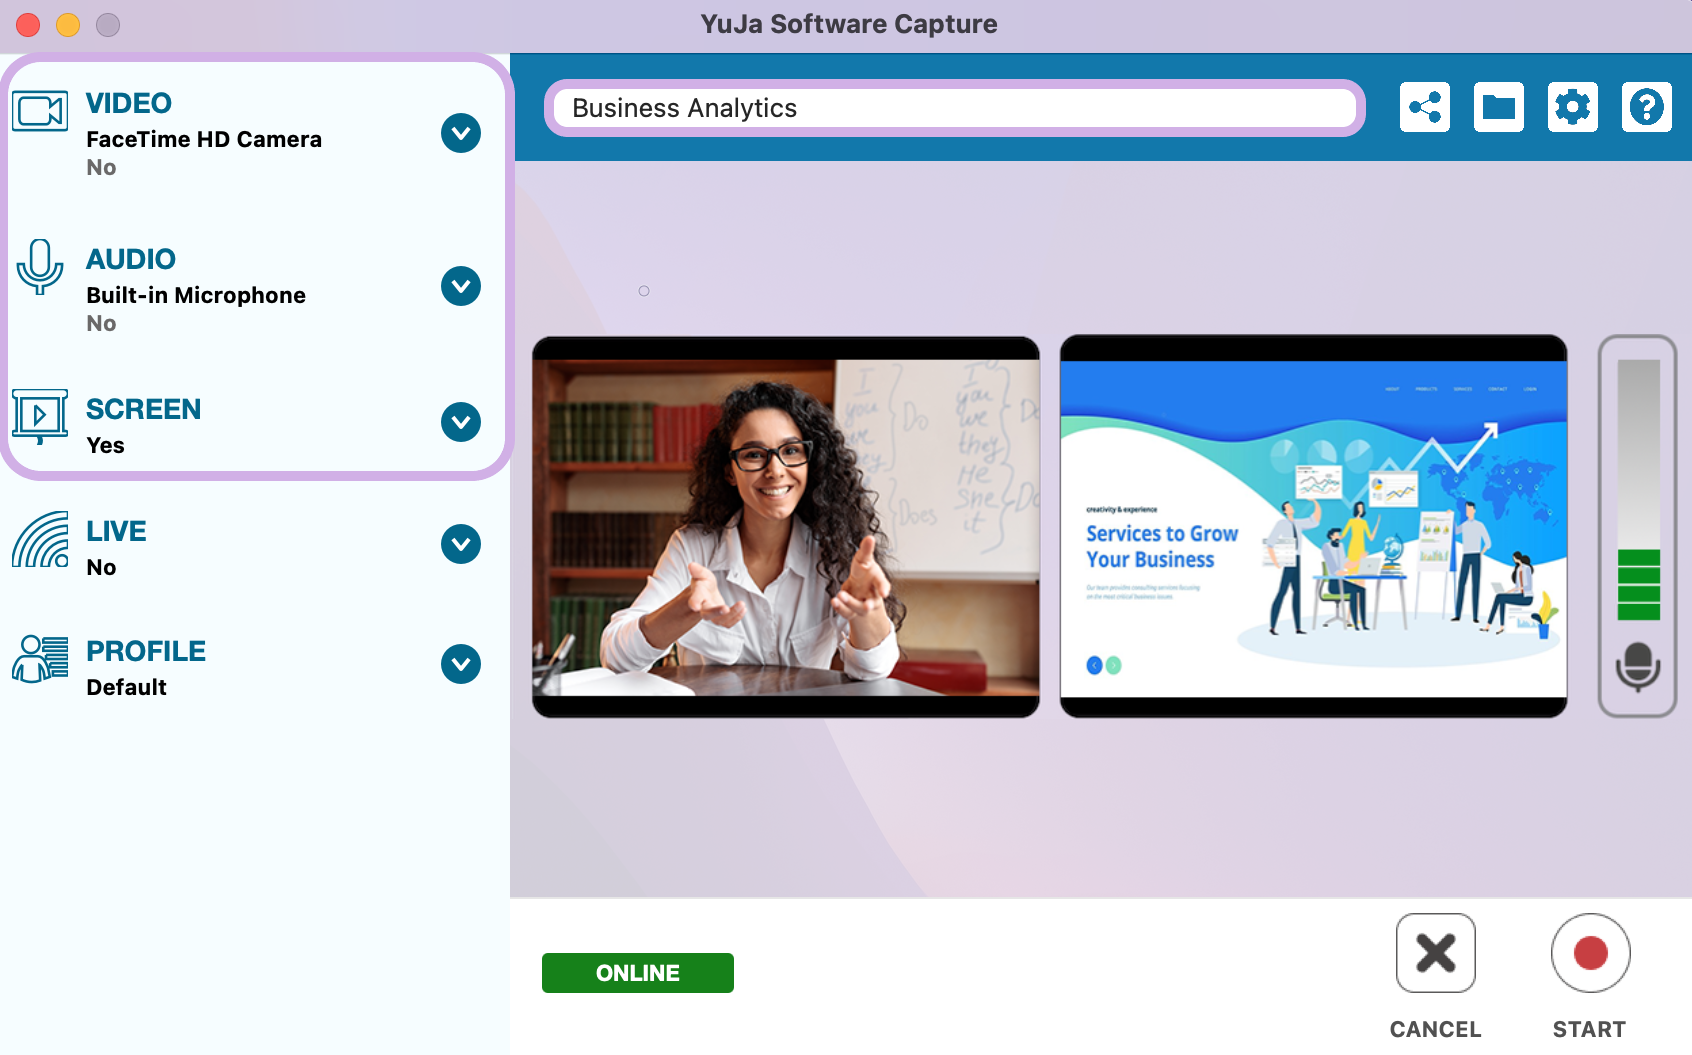 The Software Capture confidence monitor with the title text box and left-hand video, audio, and screen settings highlighted.